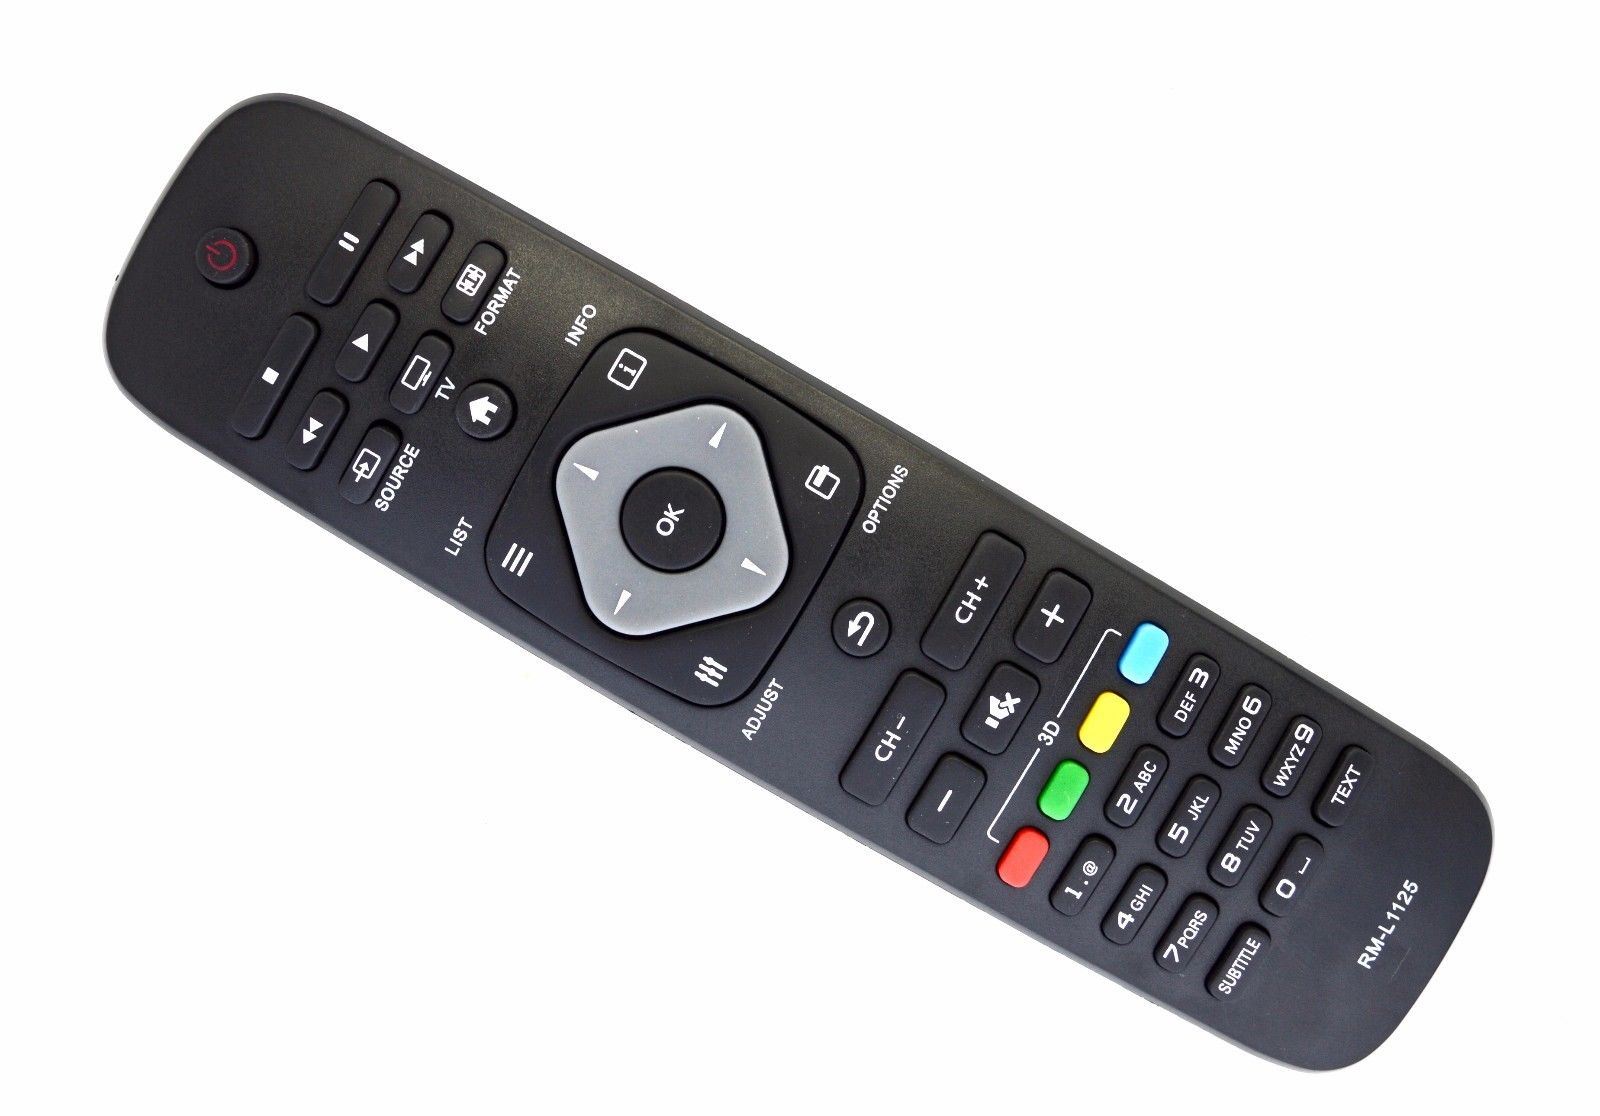 Replacement Philips TV Remote Control for 32PHH4101/88 | eBay